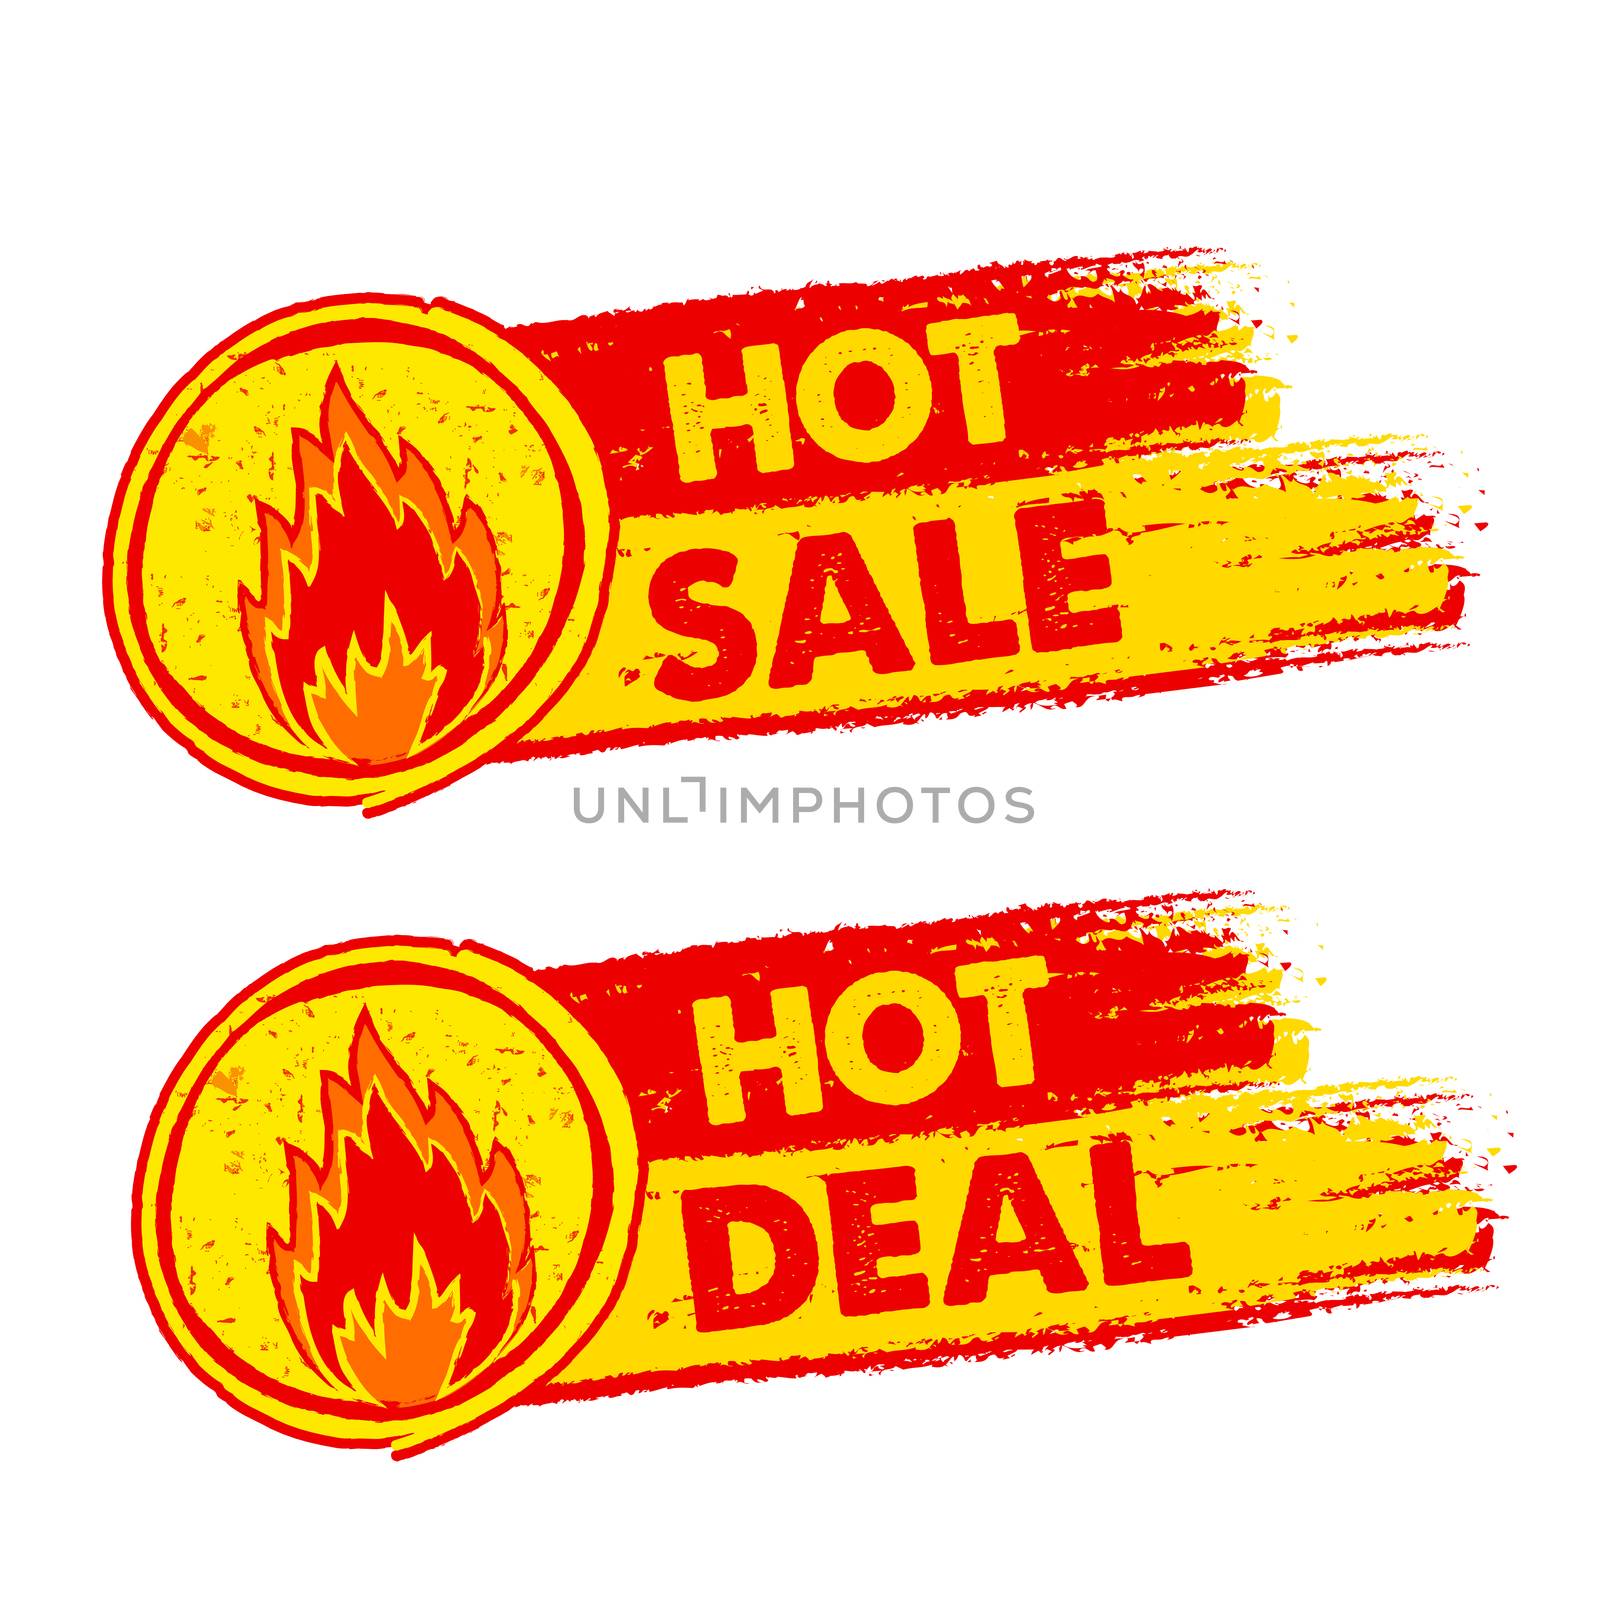 hot sale and deal on fire, yellow and red drawn labels with flam by marinini